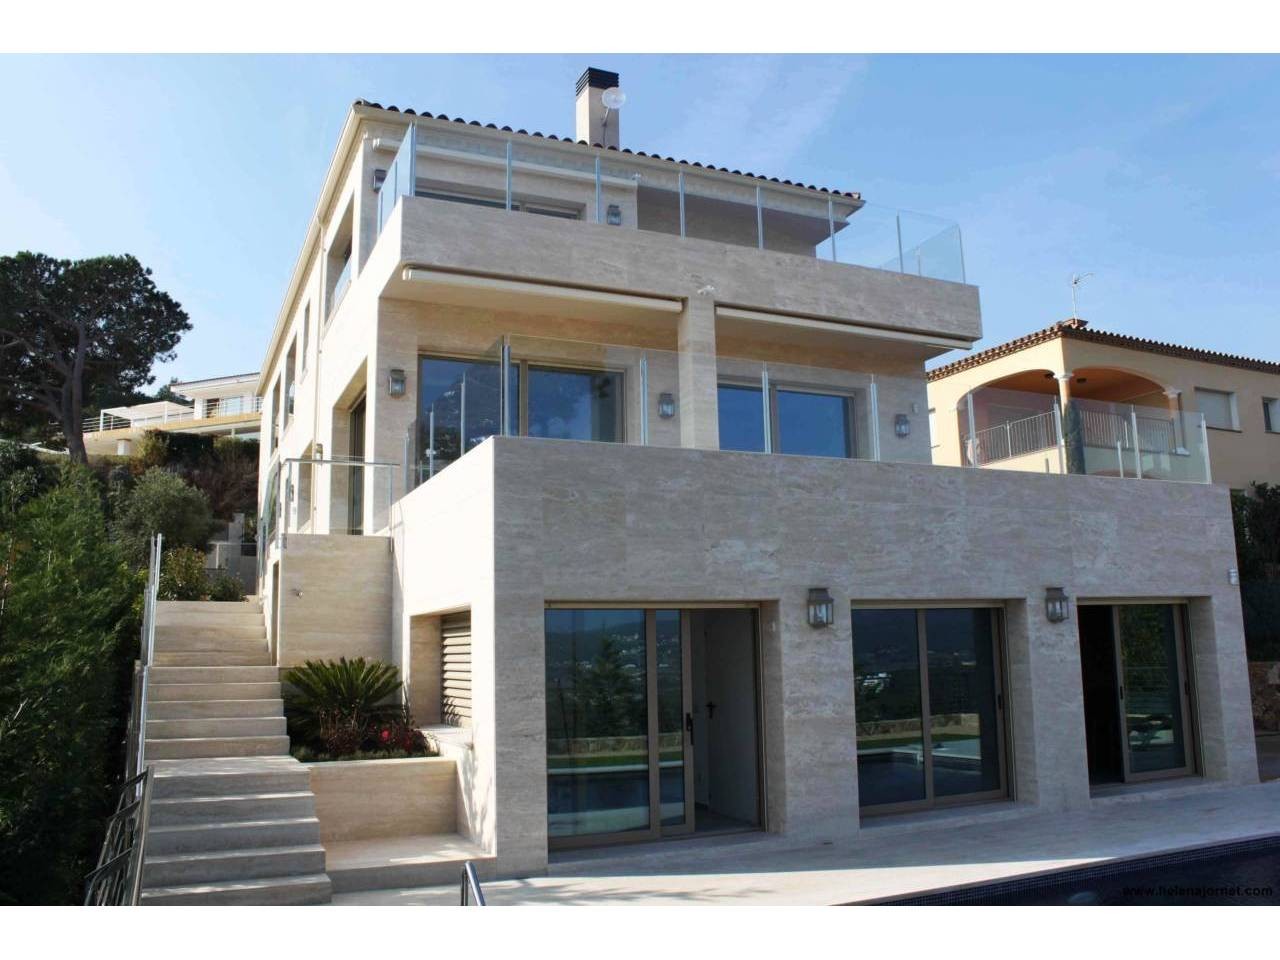 Wonderful luxury house with outdoor and indoor swimming pools and two large terraces with views - 938